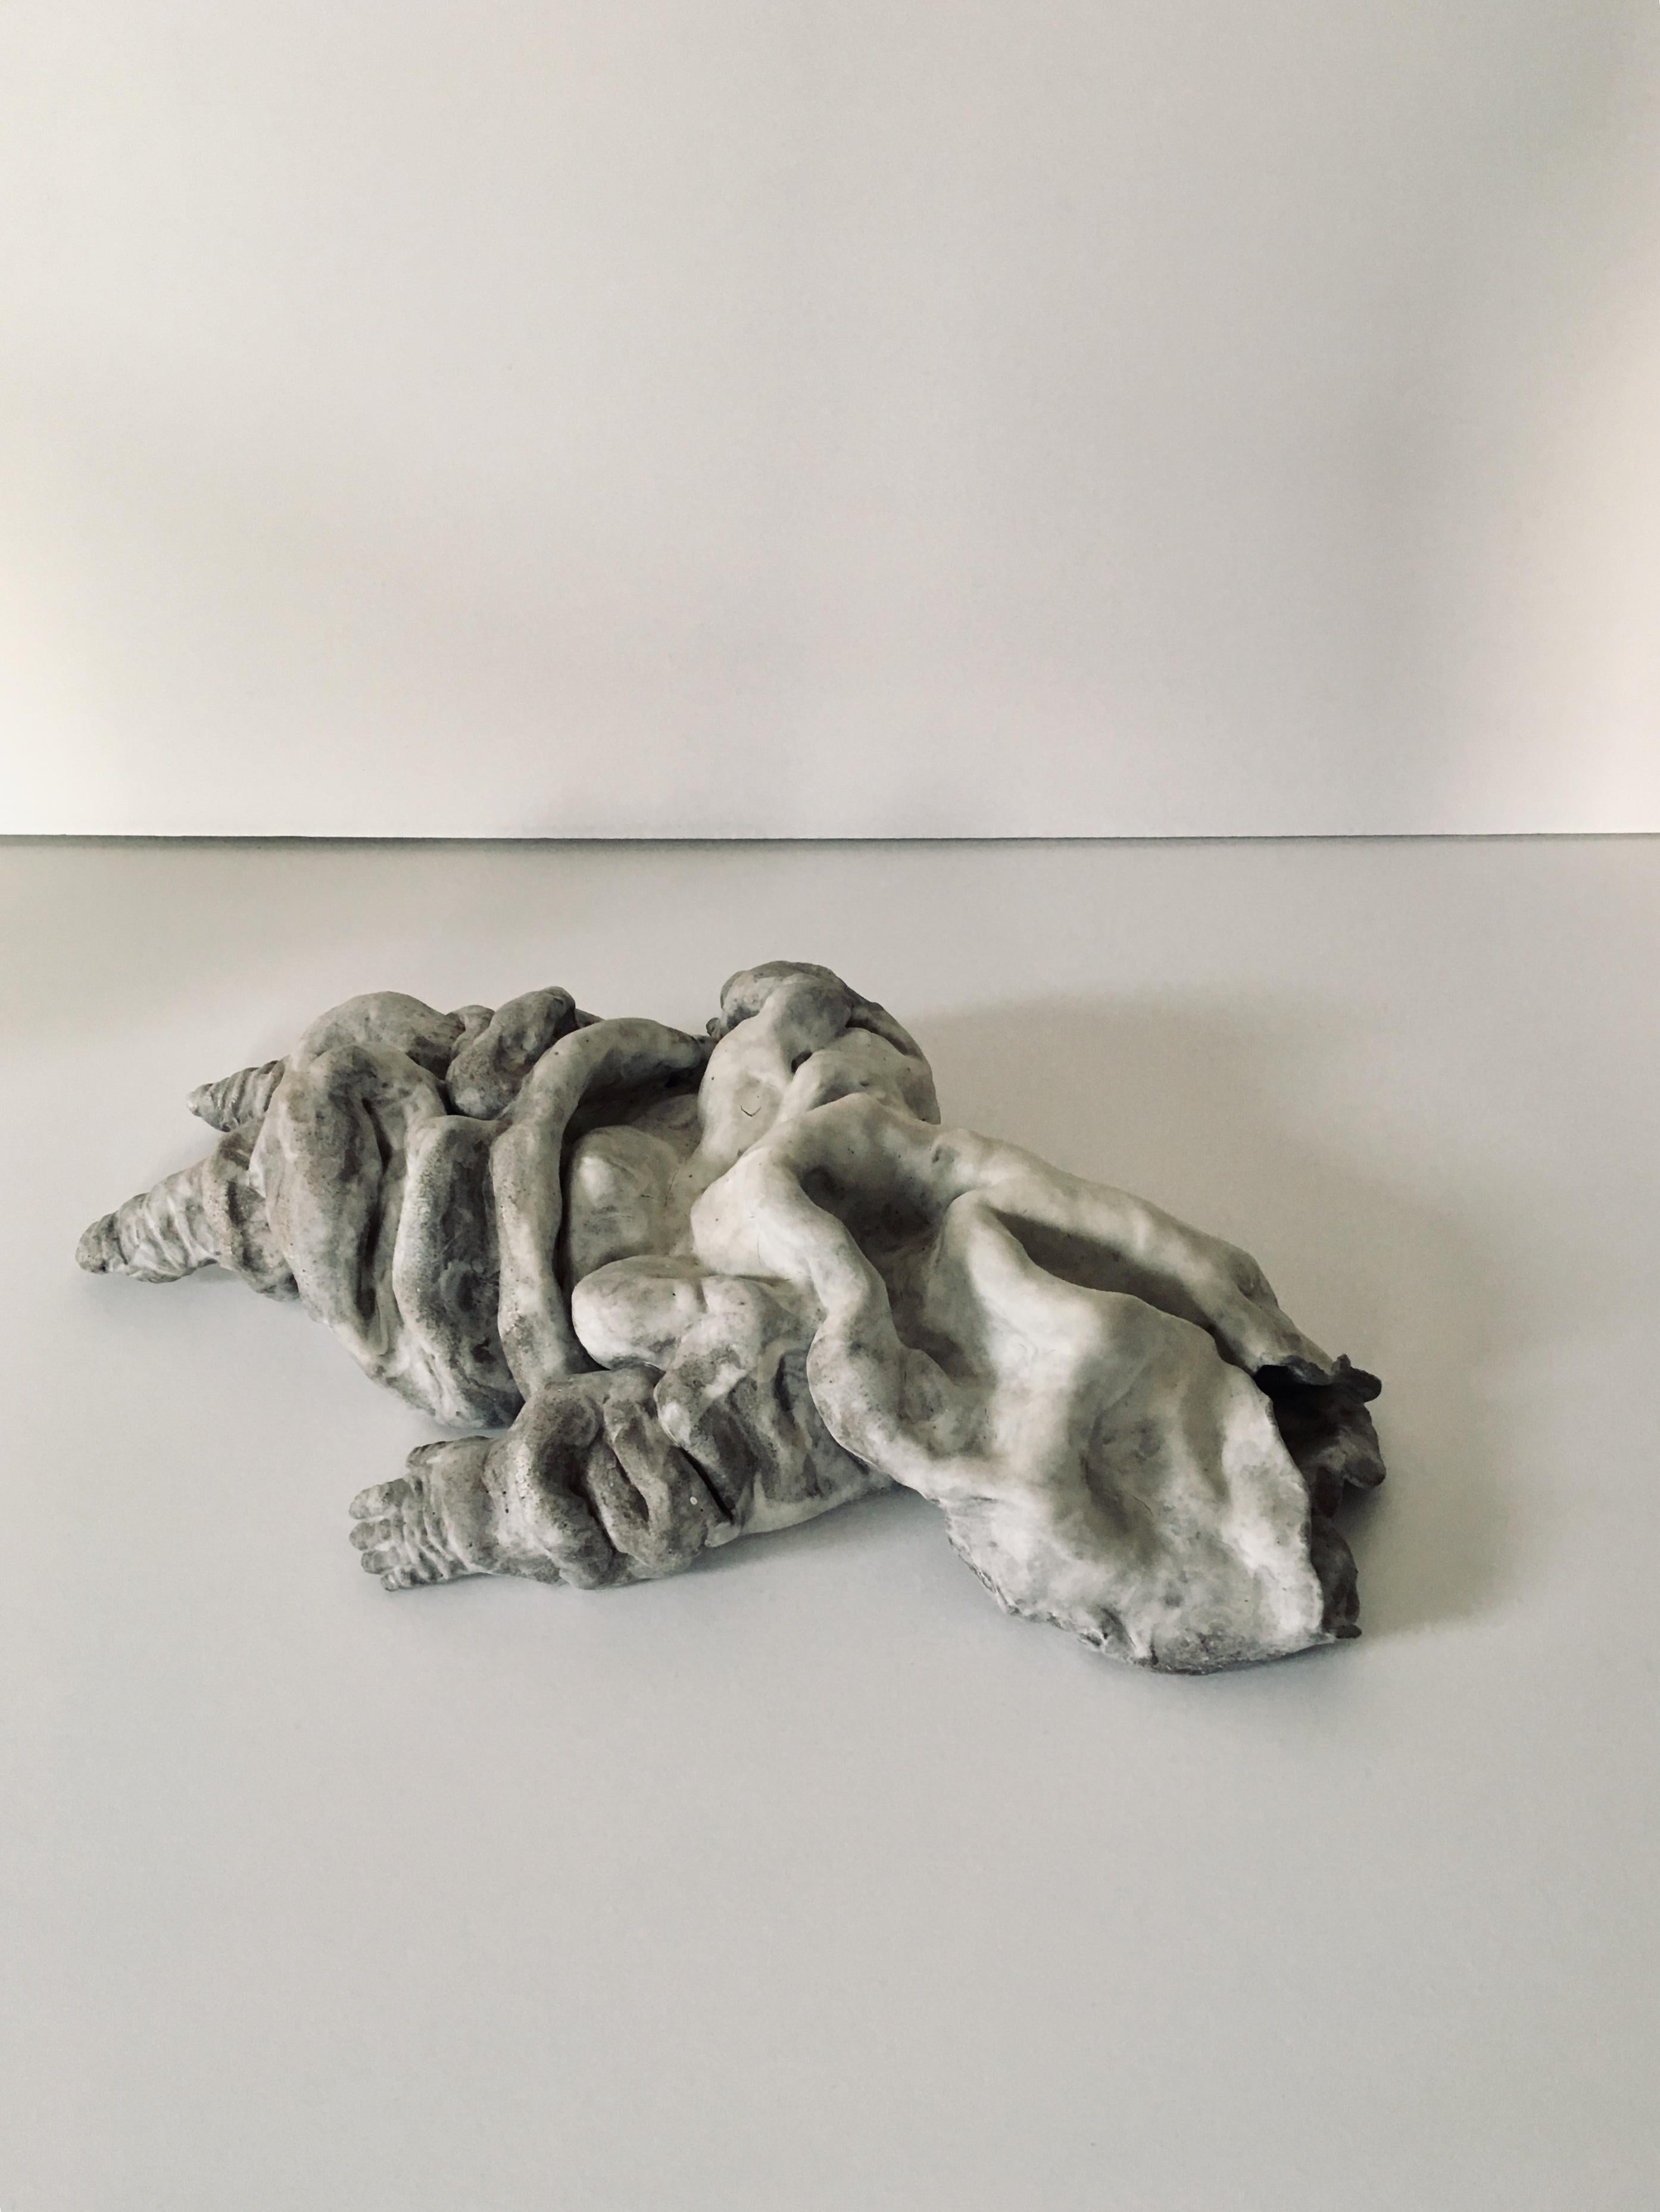 Ceramic figure lying down, sculpture: Figurative 'Wasted' - Sculpture by Kenjiro Kitade